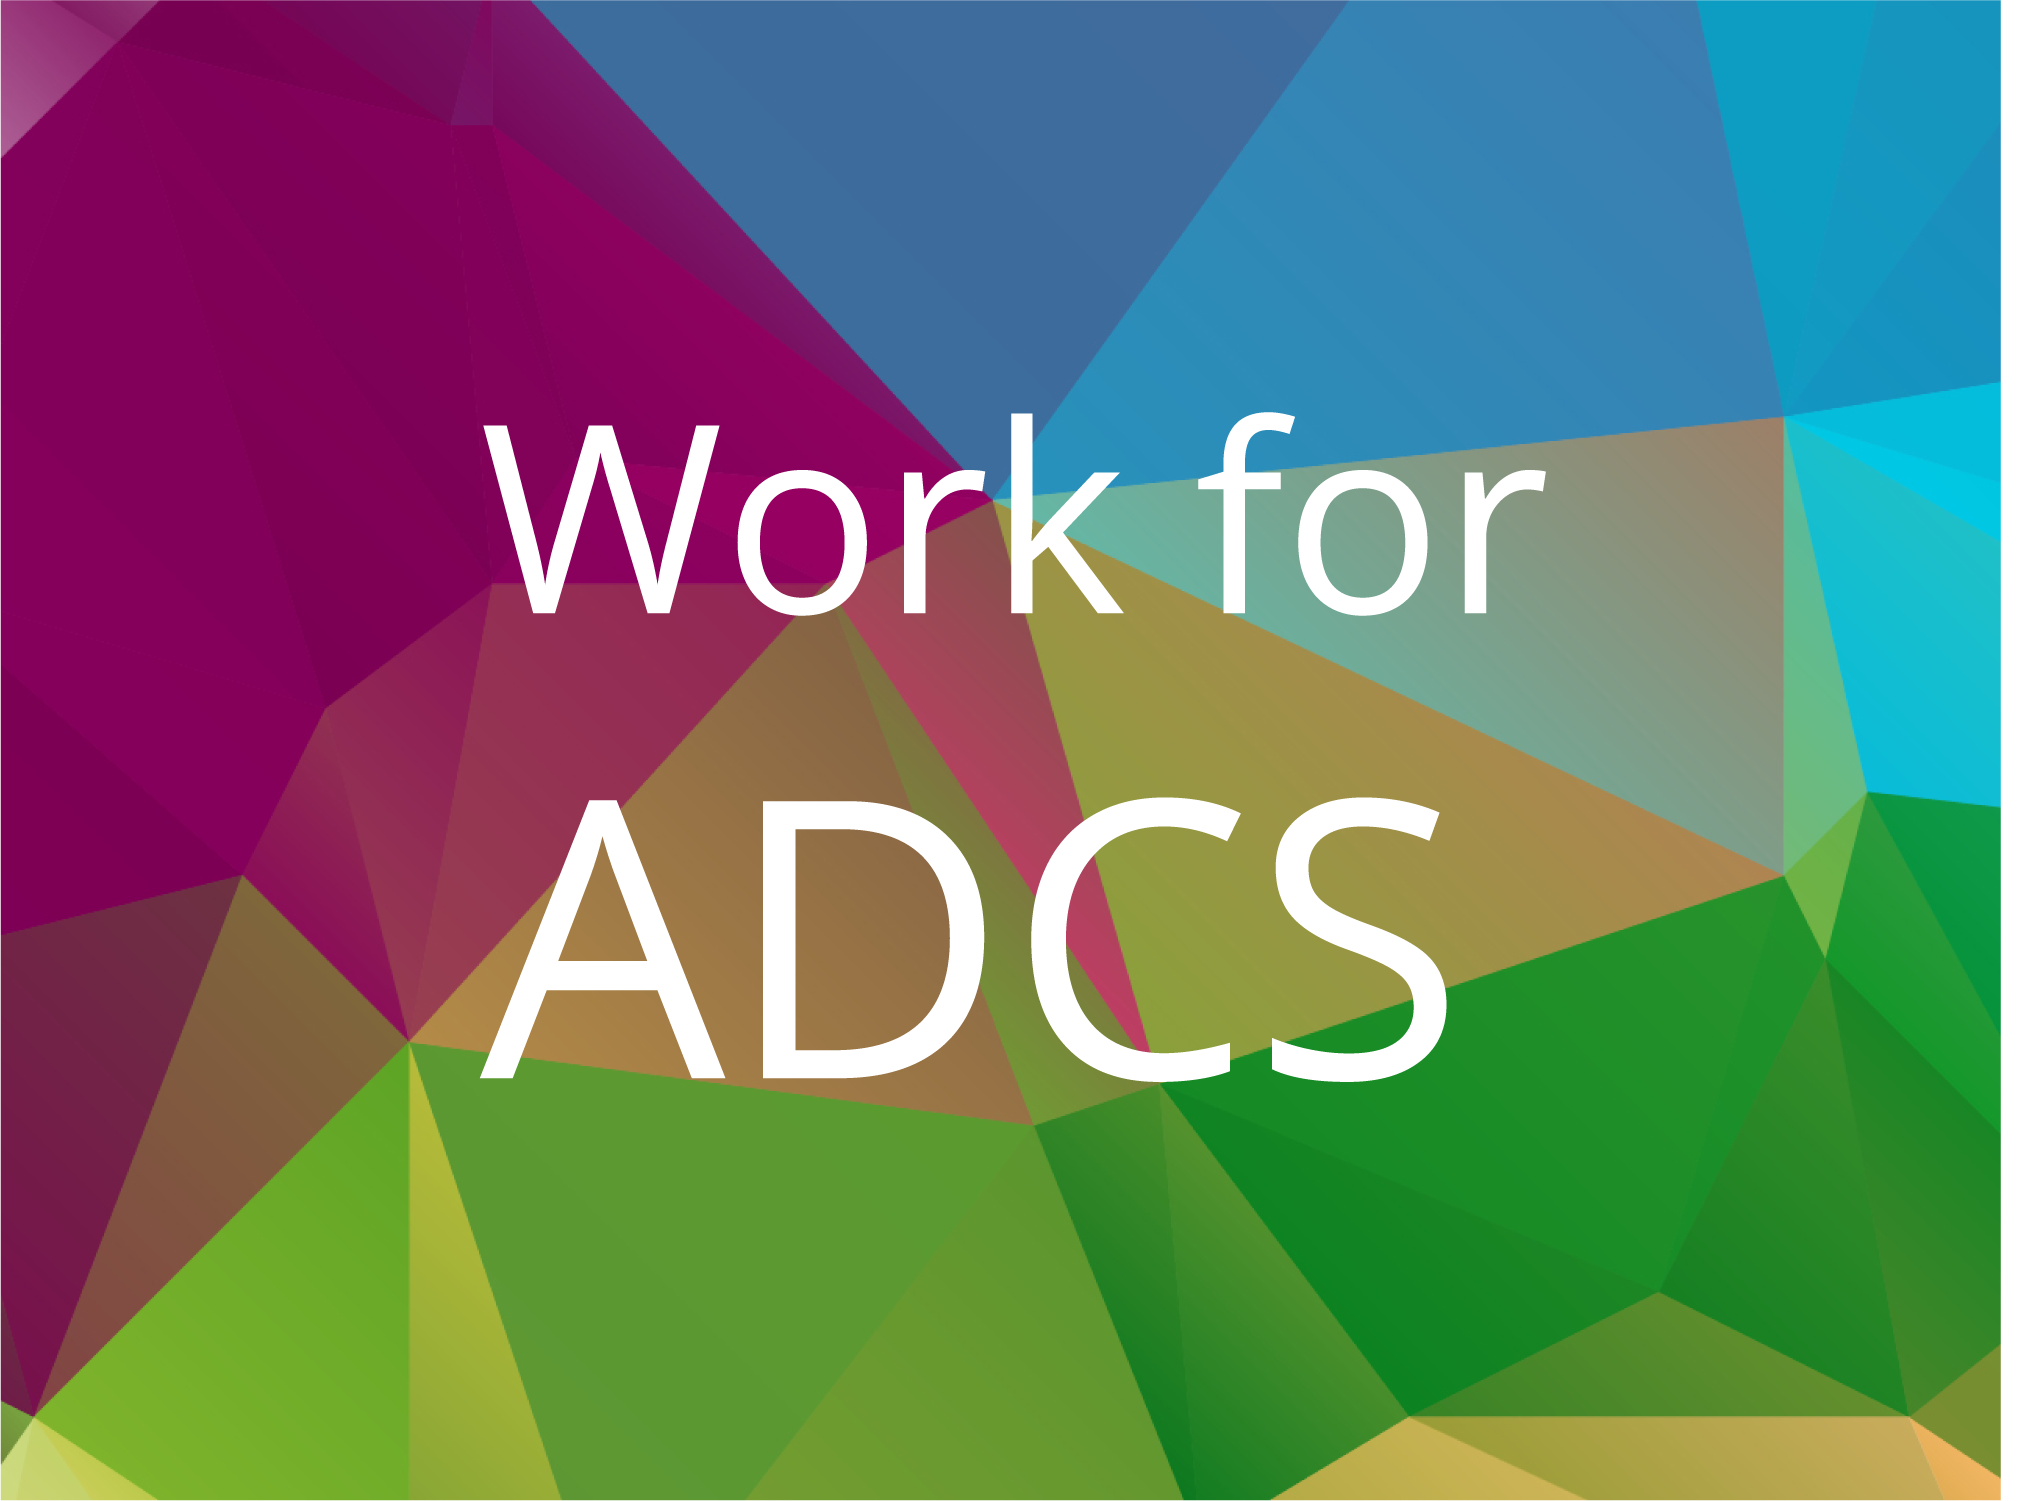 Work for ADCS